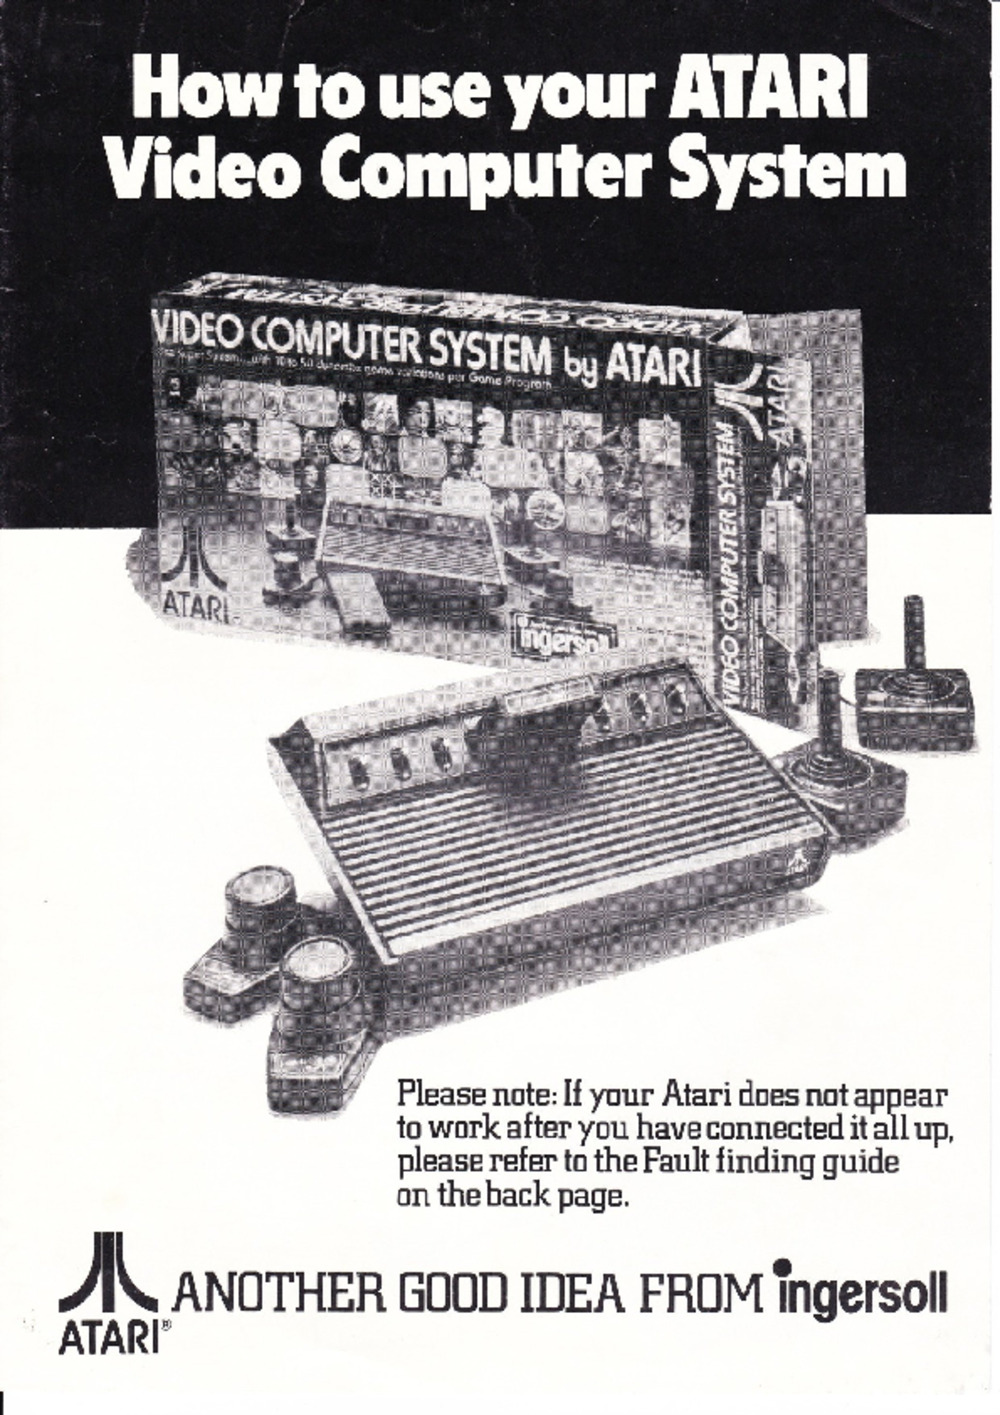 Article: How To Use Your Atari Video System